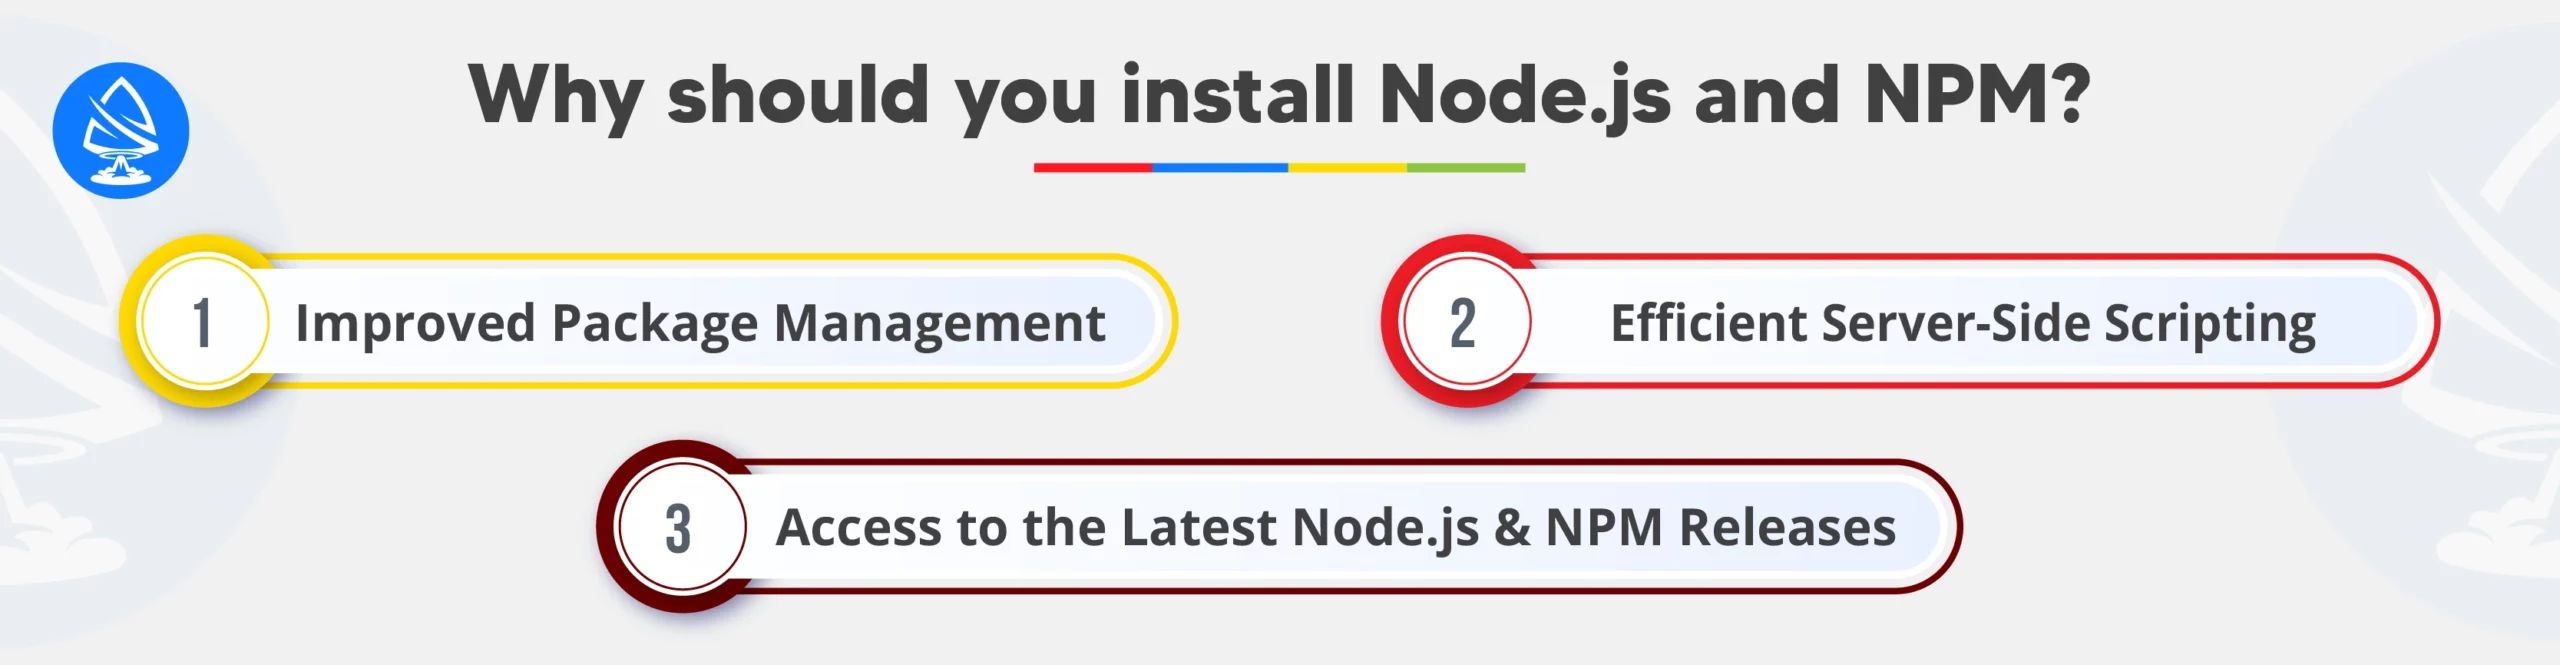 Why should you install Node.js and NPM? 